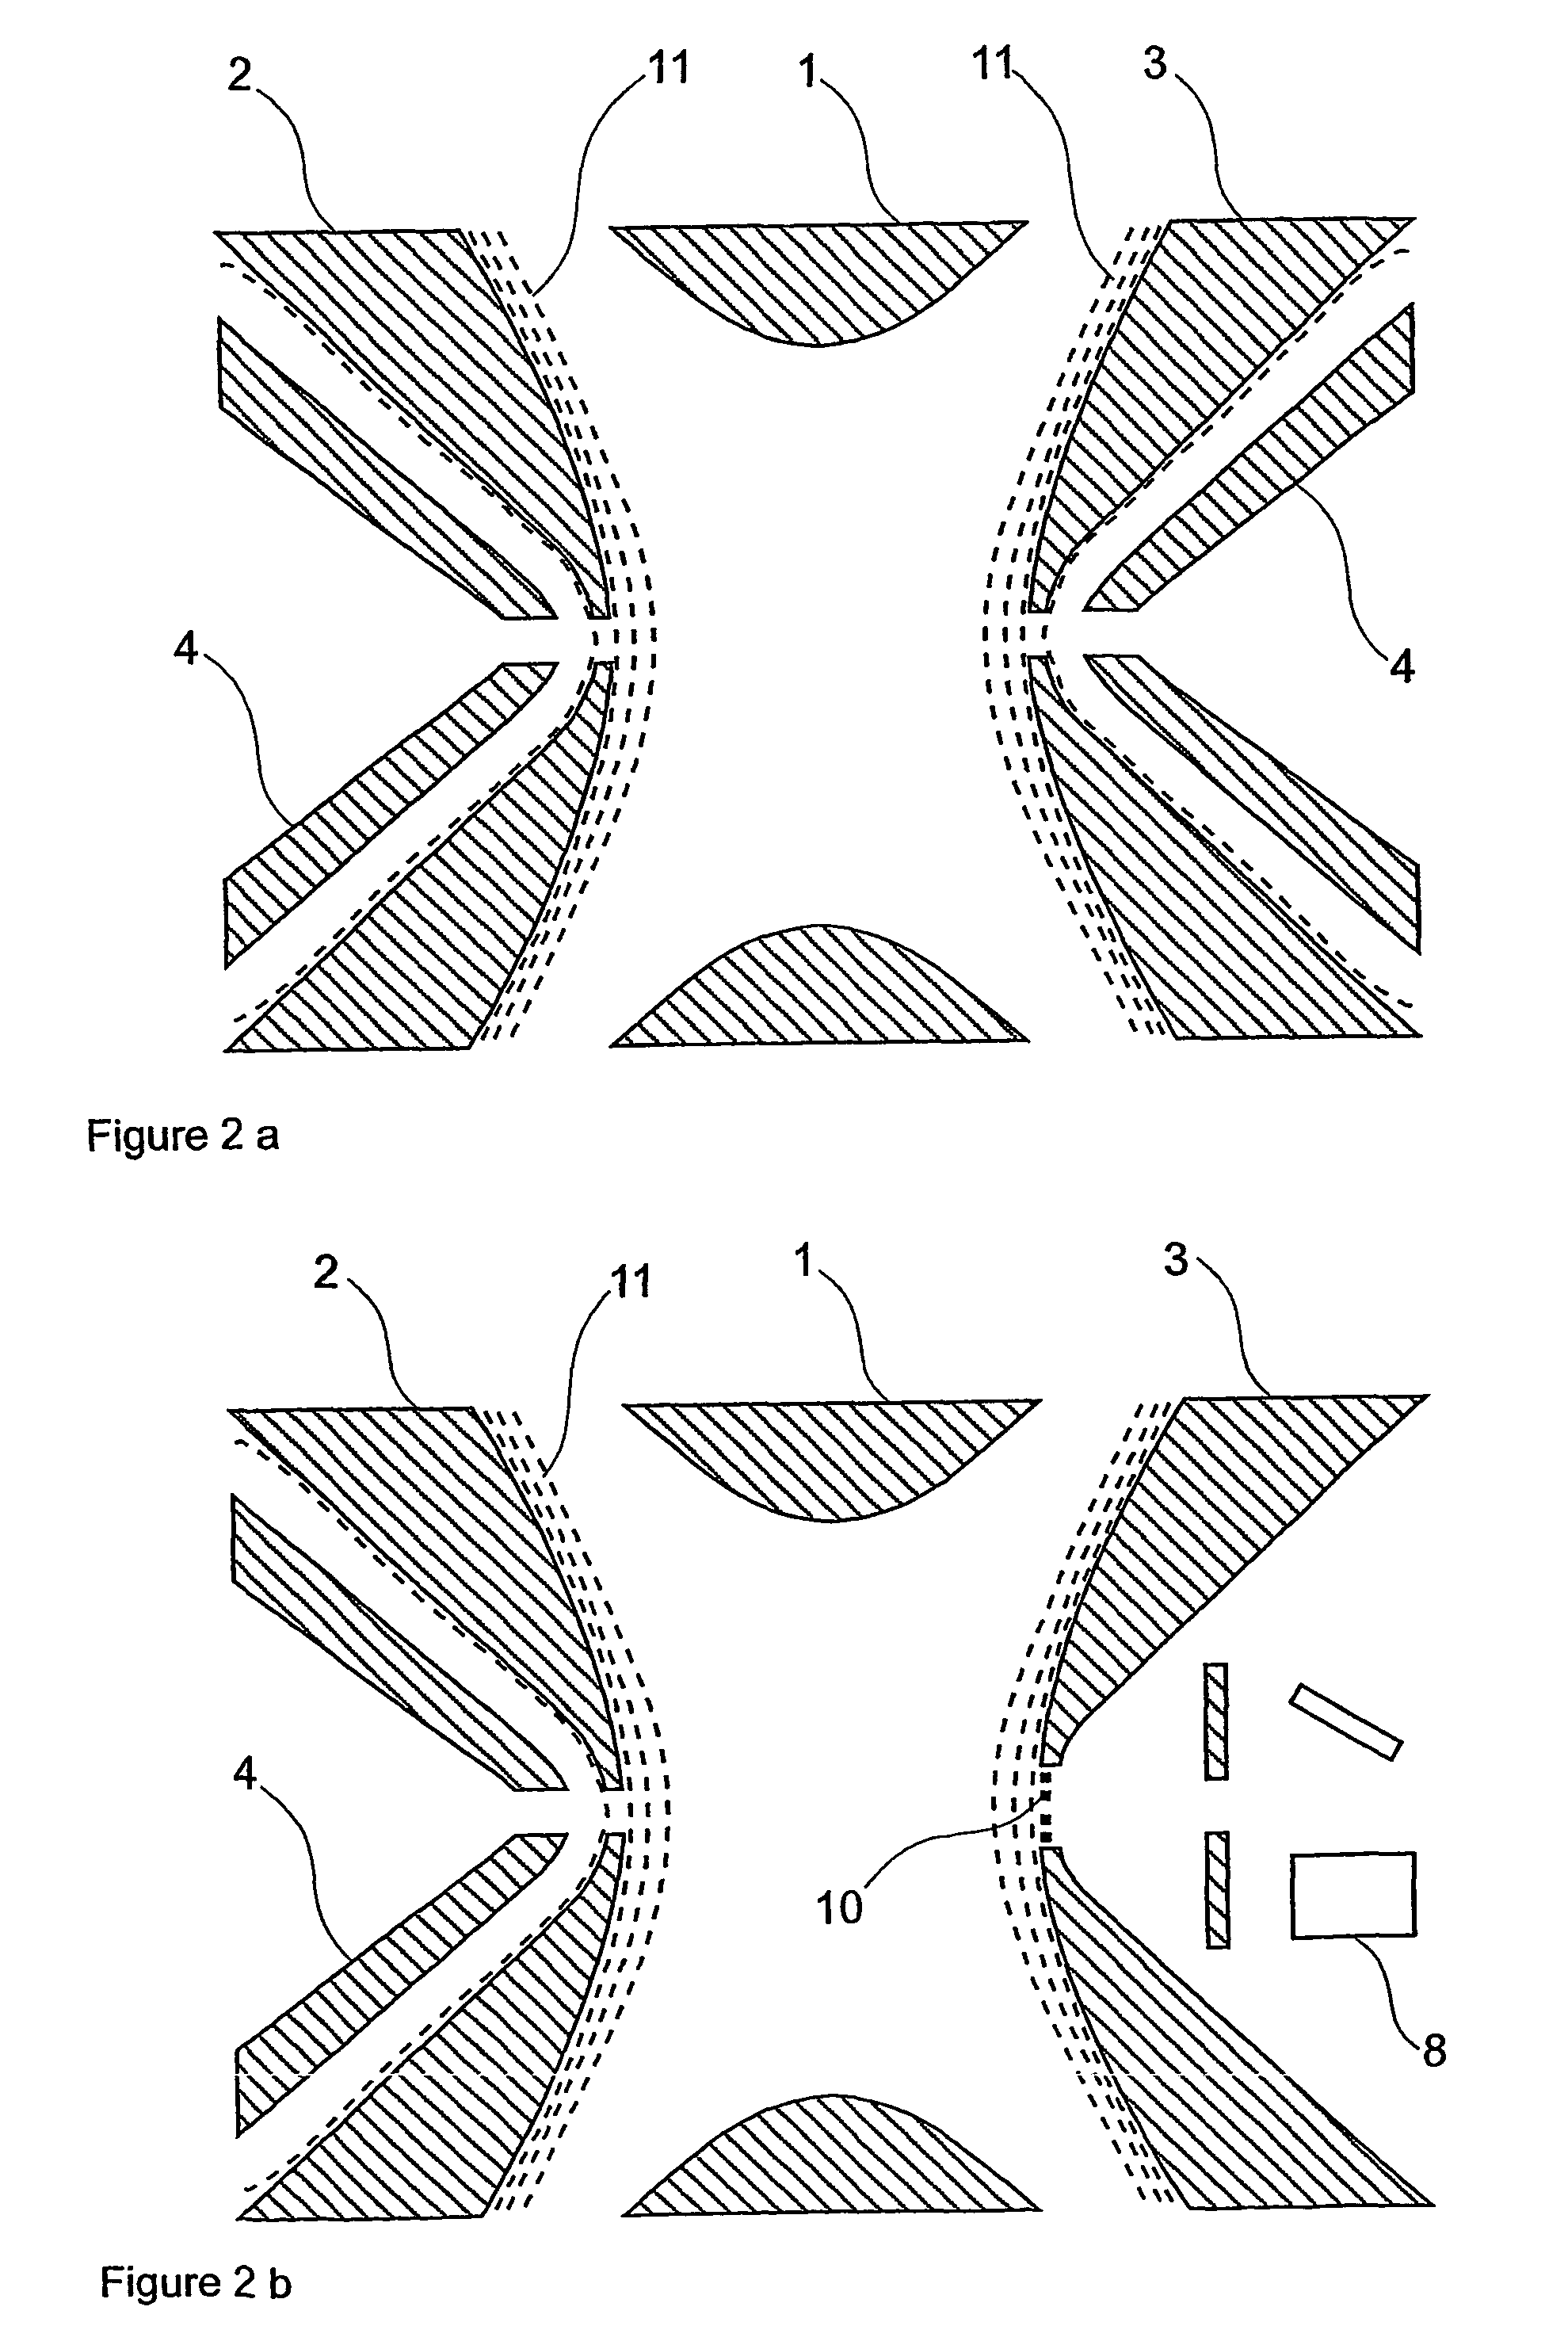 Quadrupole ion trap device and methods of operating a quadrupole ion trap device